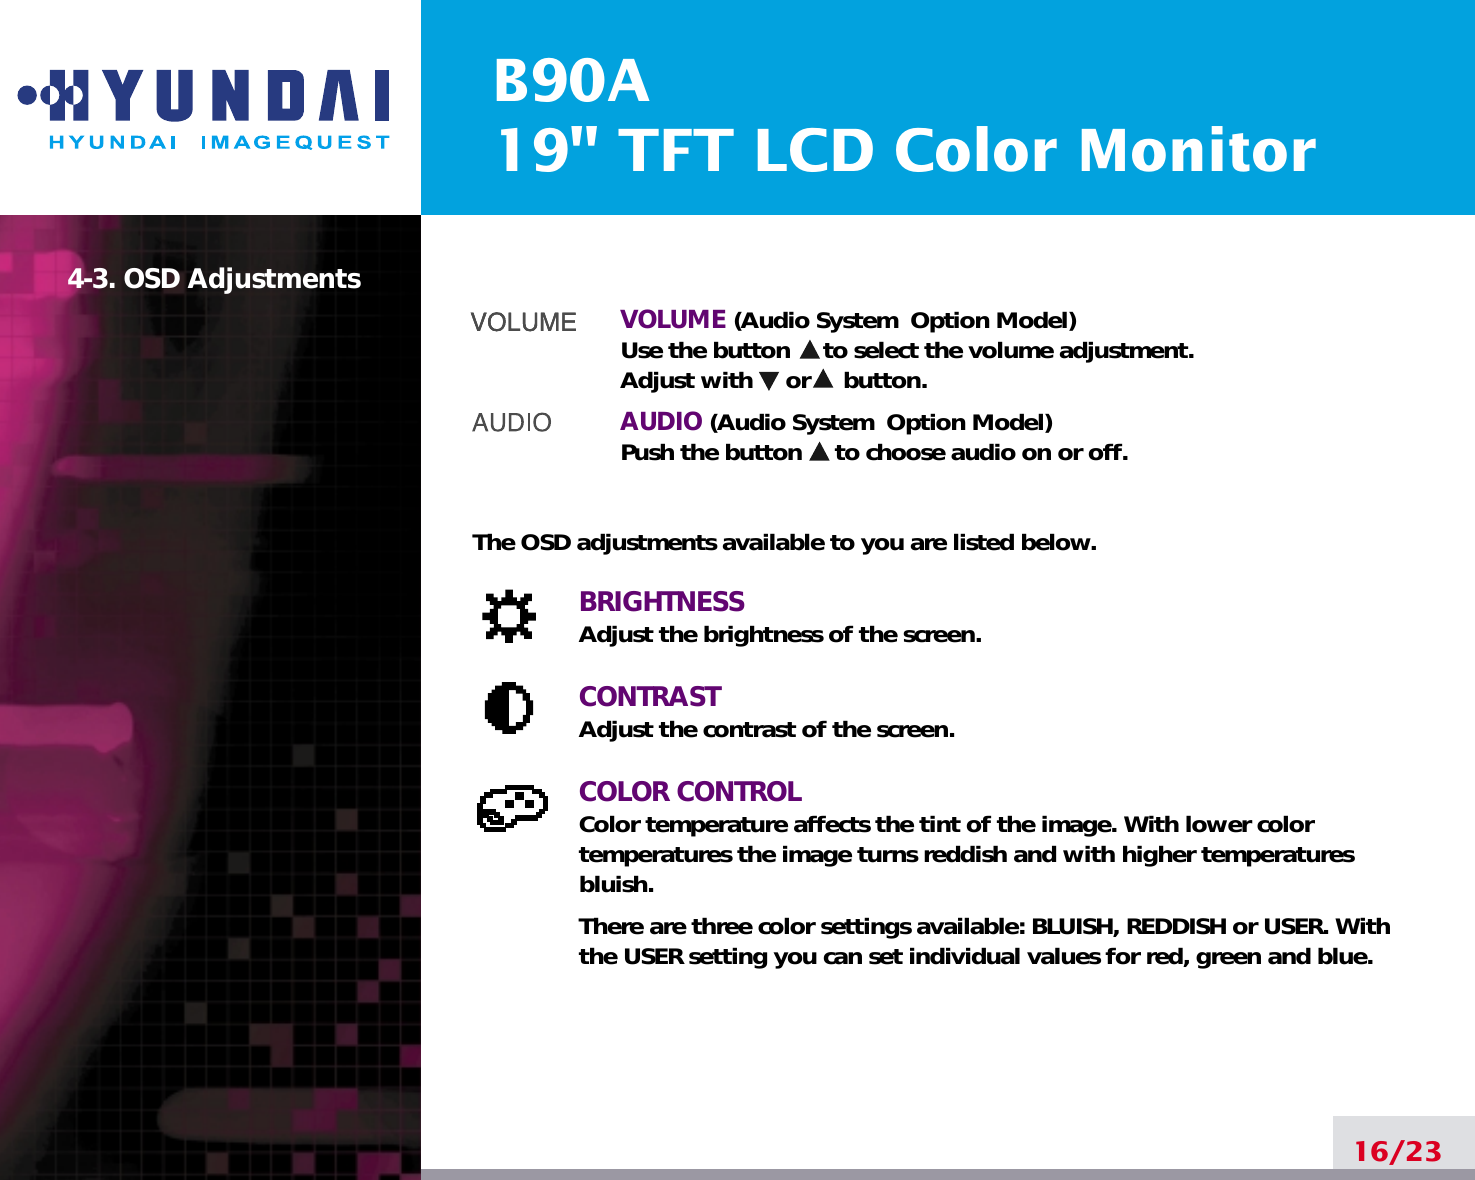 B90A19&quot; TFT LCD Color Monitor16/234-3. OSD Adjustments VOLUME (Audio System  Option Model) Use the button     to select the volume adjustment.Adjust with     or     button.AUDIO (Audio System  Option Model)Push the button     to choose audio on or off.The OSD adjustments available to you are listed below.BRIGHTNESSAdjust the brightness of the screen.CONTRASTAdjust the contrast of the screen.COLOR CONTROLColor temperature affects the tint of the image. With lower color temperatures the image turns reddish and with higher temperatures bluish.There are three color settings available: BLUISH, REDDISH or USER. Withthe USER setting you can set individual values for red, green and blue.